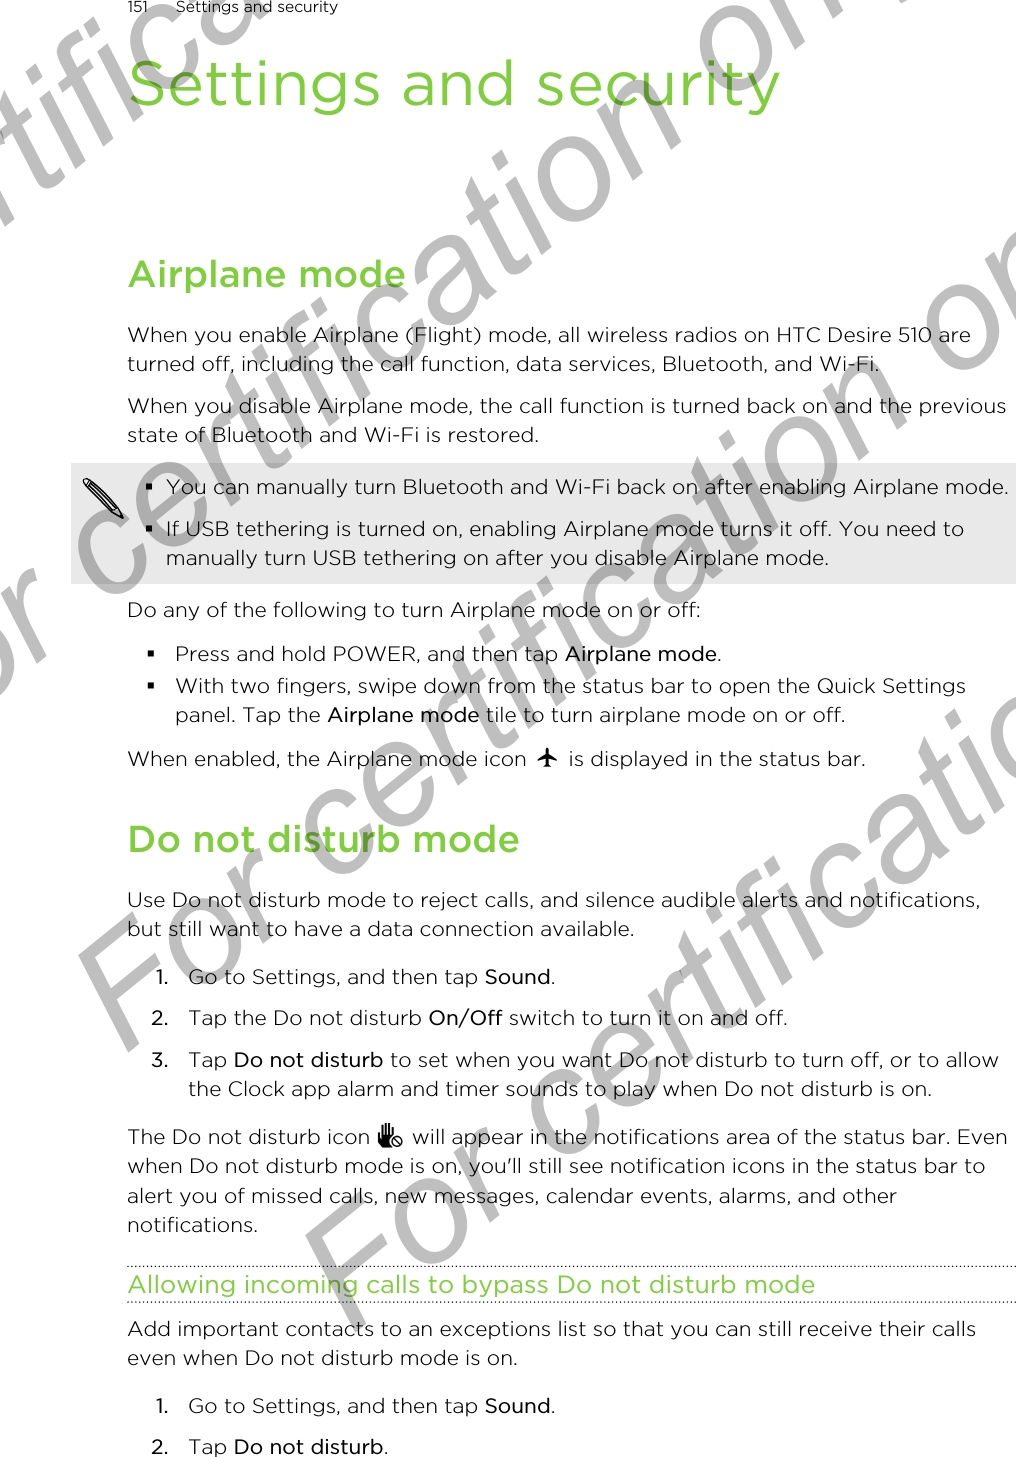 Settings and securityAirplane modeWhen you enable Airplane (Flight) mode, all wireless radios on HTC Desire 510 areturned off, including the call function, data services, Bluetooth, and Wi-Fi.When you disable Airplane mode, the call function is turned back on and the previousstate of Bluetooth and Wi-Fi is restored.§You can manually turn Bluetooth and Wi-Fi back on after enabling Airplane mode.§If USB tethering is turned on, enabling Airplane mode turns it off. You need tomanually turn USB tethering on after you disable Airplane mode.Do any of the following to turn Airplane mode on or off:§Press and hold POWER, and then tap Airplane mode.§With two fingers, swipe down from the status bar to open the Quick Settingspanel. Tap the Airplane mode tile to turn airplane mode on or off.When enabled, the Airplane mode icon   is displayed in the status bar.Do not disturb modeUse Do not disturb mode to reject calls, and silence audible alerts and notifications,but still want to have a data connection available.1. Go to Settings, and then tap Sound.2. Tap the Do not disturb On/Off switch to turn it on and off.3. Tap Do not disturb to set when you want Do not disturb to turn off, or to allowthe Clock app alarm and timer sounds to play when Do not disturb is on.The Do not disturb icon   will appear in the notifications area of the status bar. Evenwhen Do not disturb mode is on, you&apos;ll still see notification icons in the status bar toalert you of missed calls, new messages, calendar events, alarms, and othernotifications.Allowing incoming calls to bypass Do not disturb modeAdd important contacts to an exceptions list so that you can still receive their callseven when Do not disturb mode is on.1. Go to Settings, and then tap Sound.2. Tap Do not disturb.151 Settings and securityFor certification  For certification only  For certification only  For certification only 